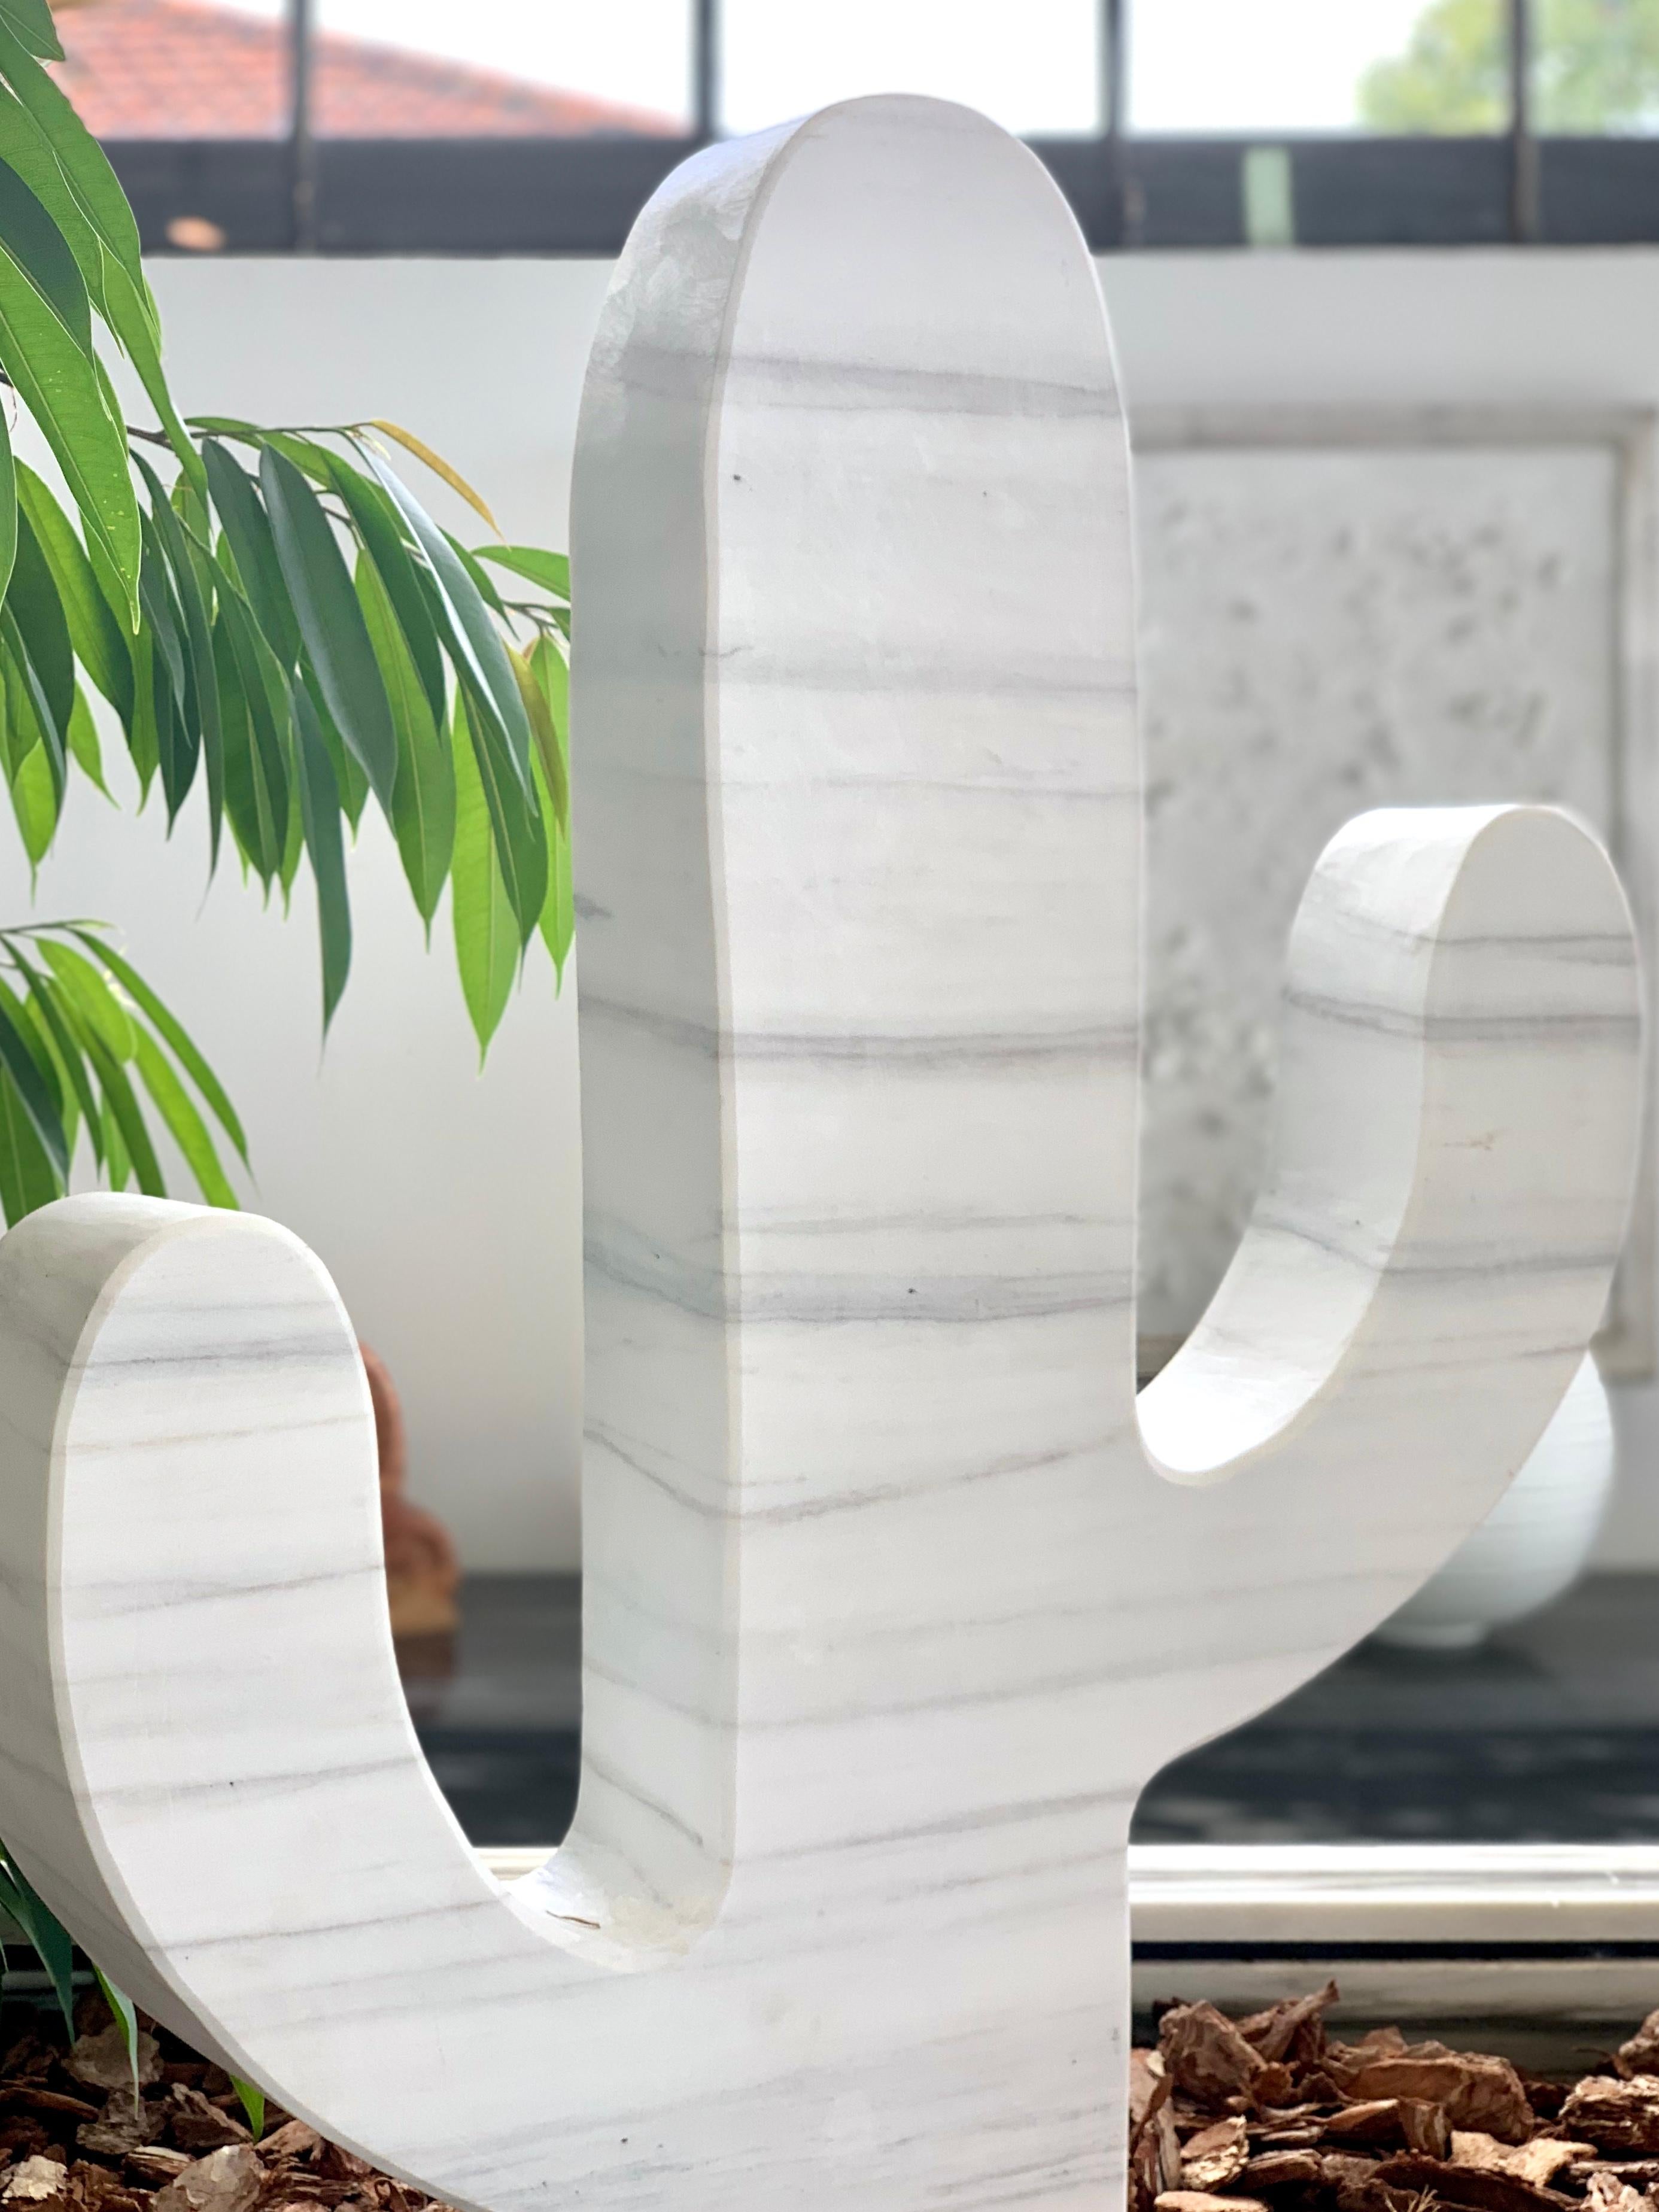 Cactus, is part of our Paonazzo statue family made in Carrara/ Italy. If placing it alone or with second one, it is definitely an eyecatcher!
Its special material, Paonazzo Marble, displays a wonderful color range including a likely white and beige